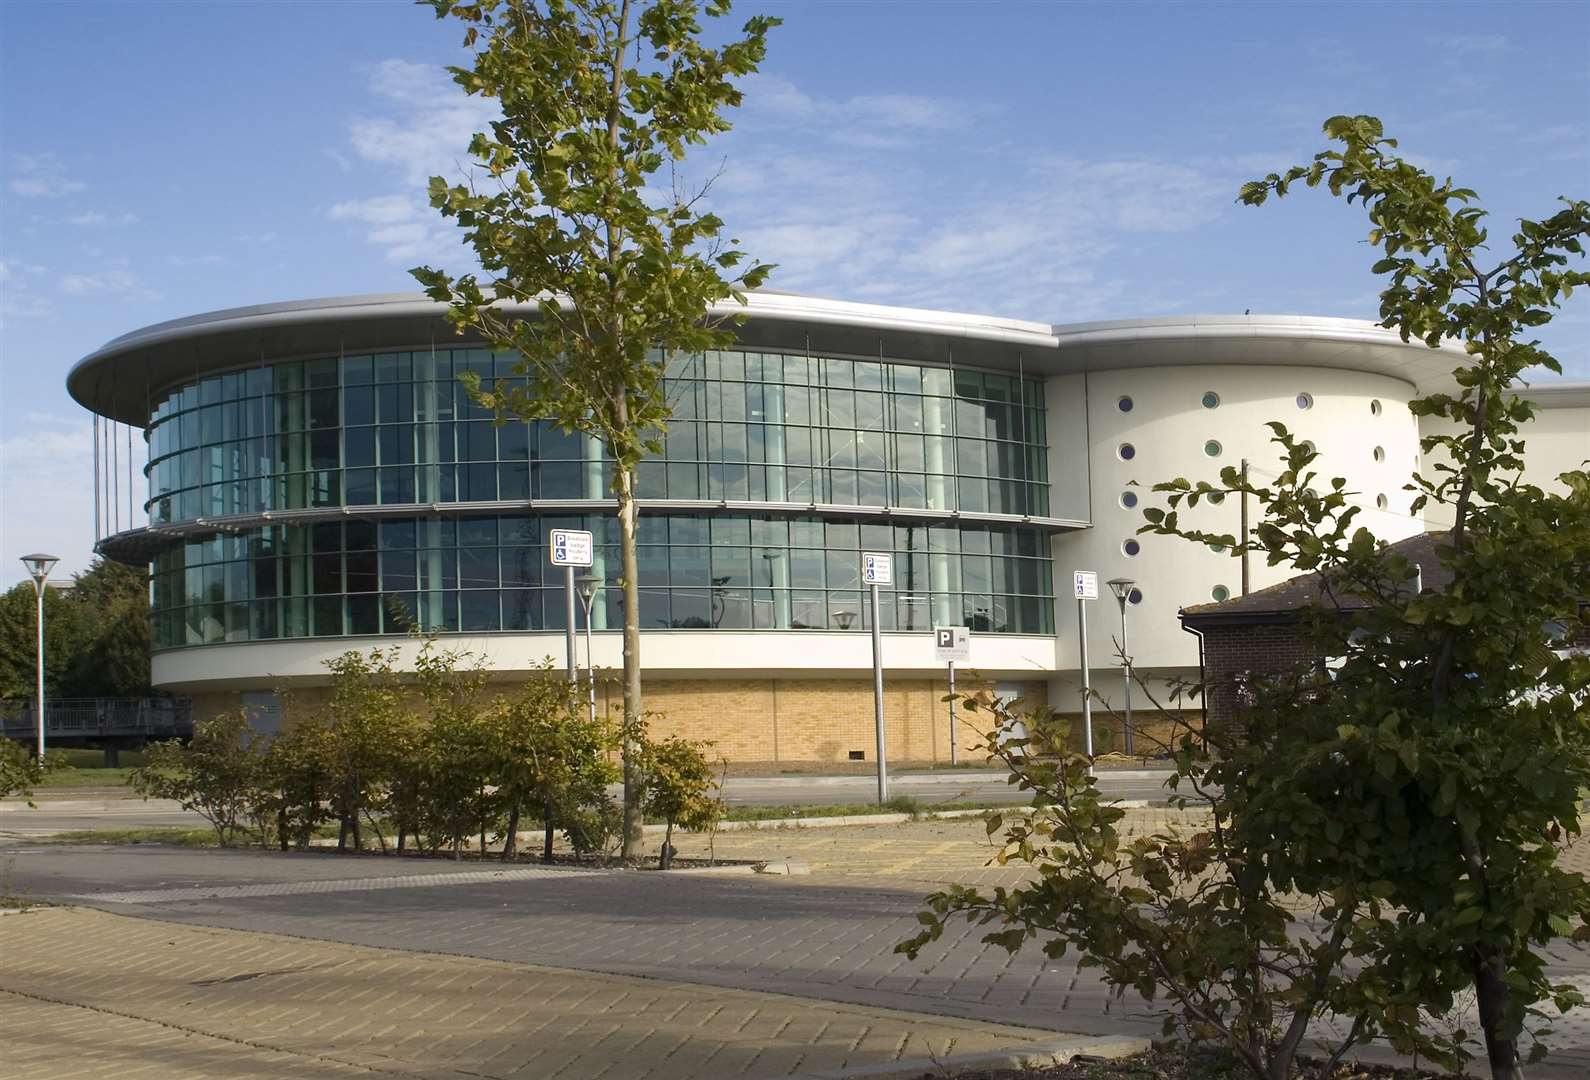 The centre underwent a £17m revamp in the mid-2000s